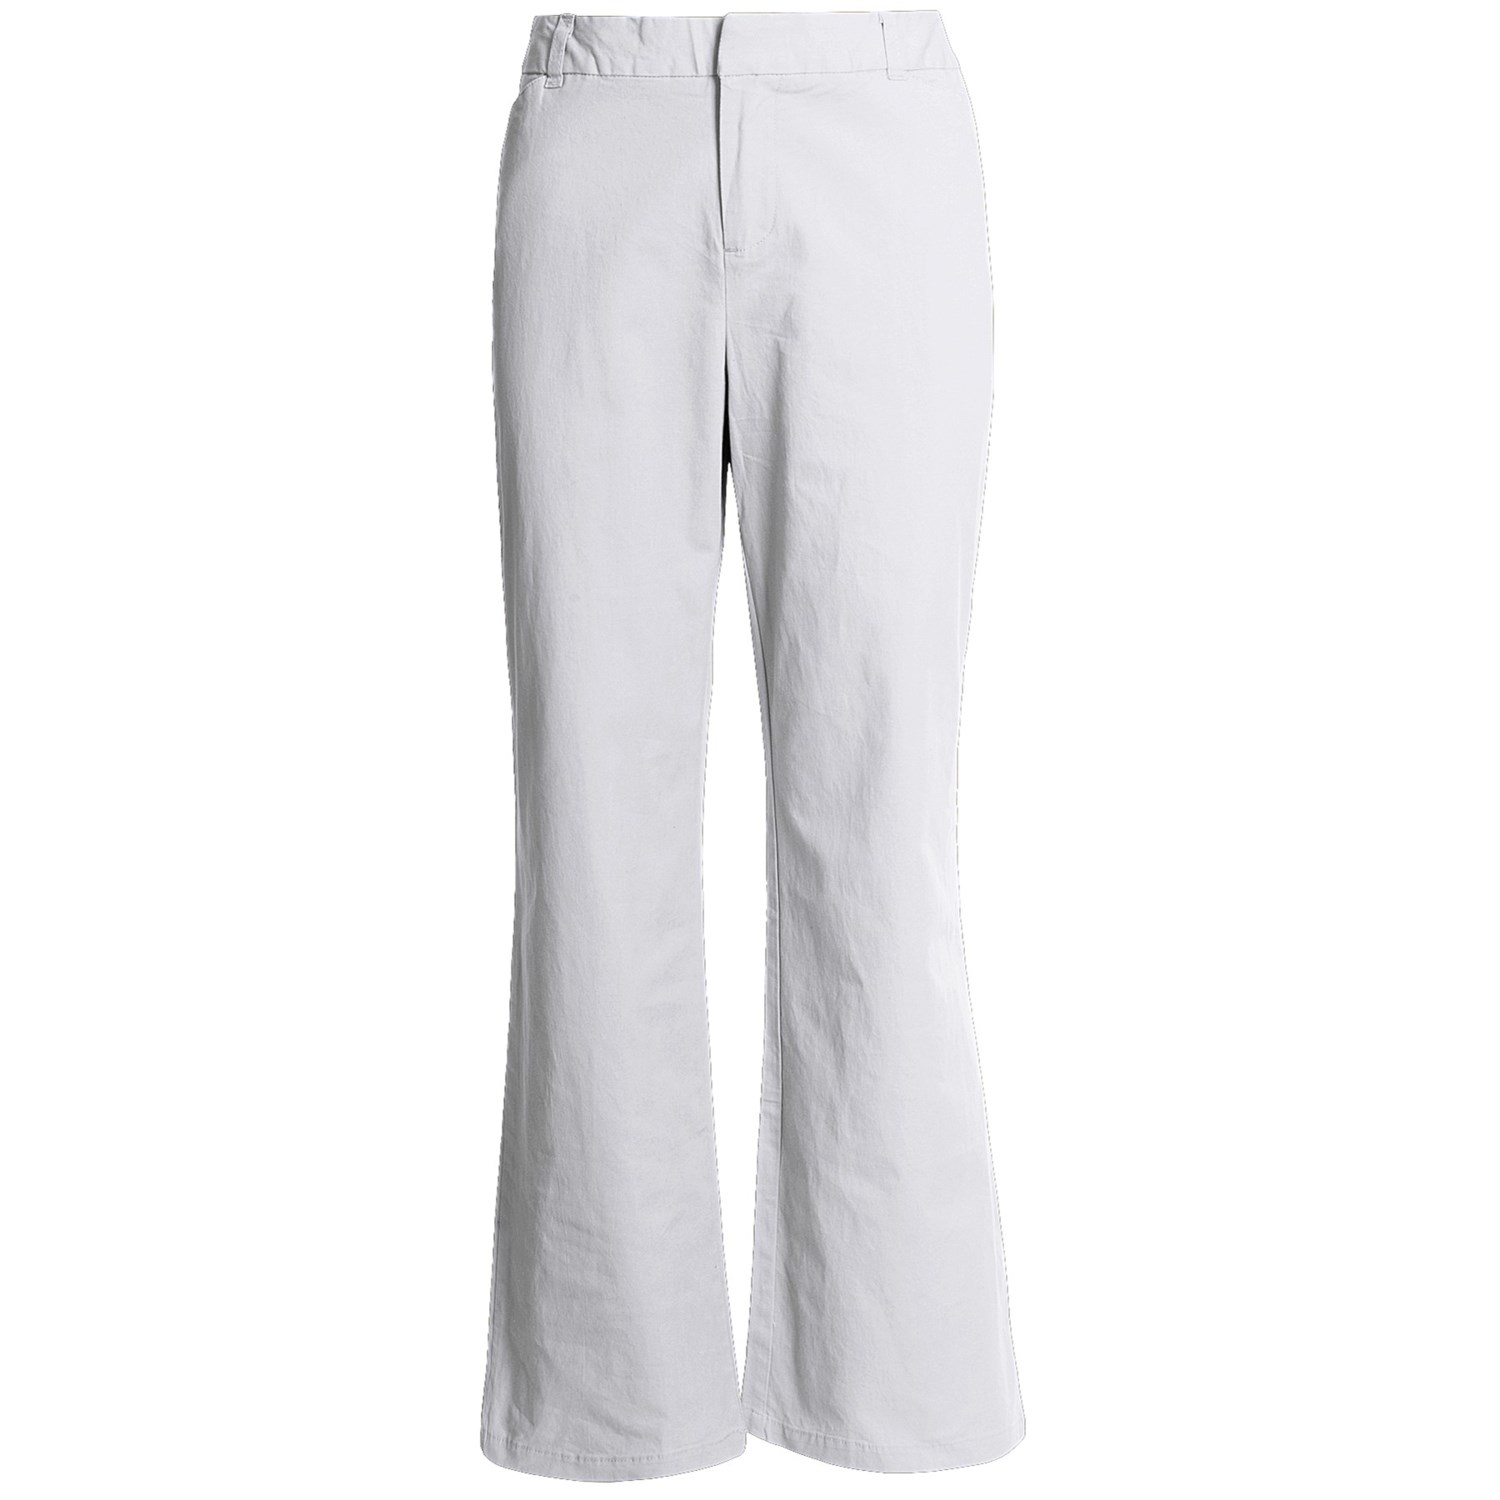 Stretch Woven Twill Bootcut Pants - Flat Front (For Women) in White